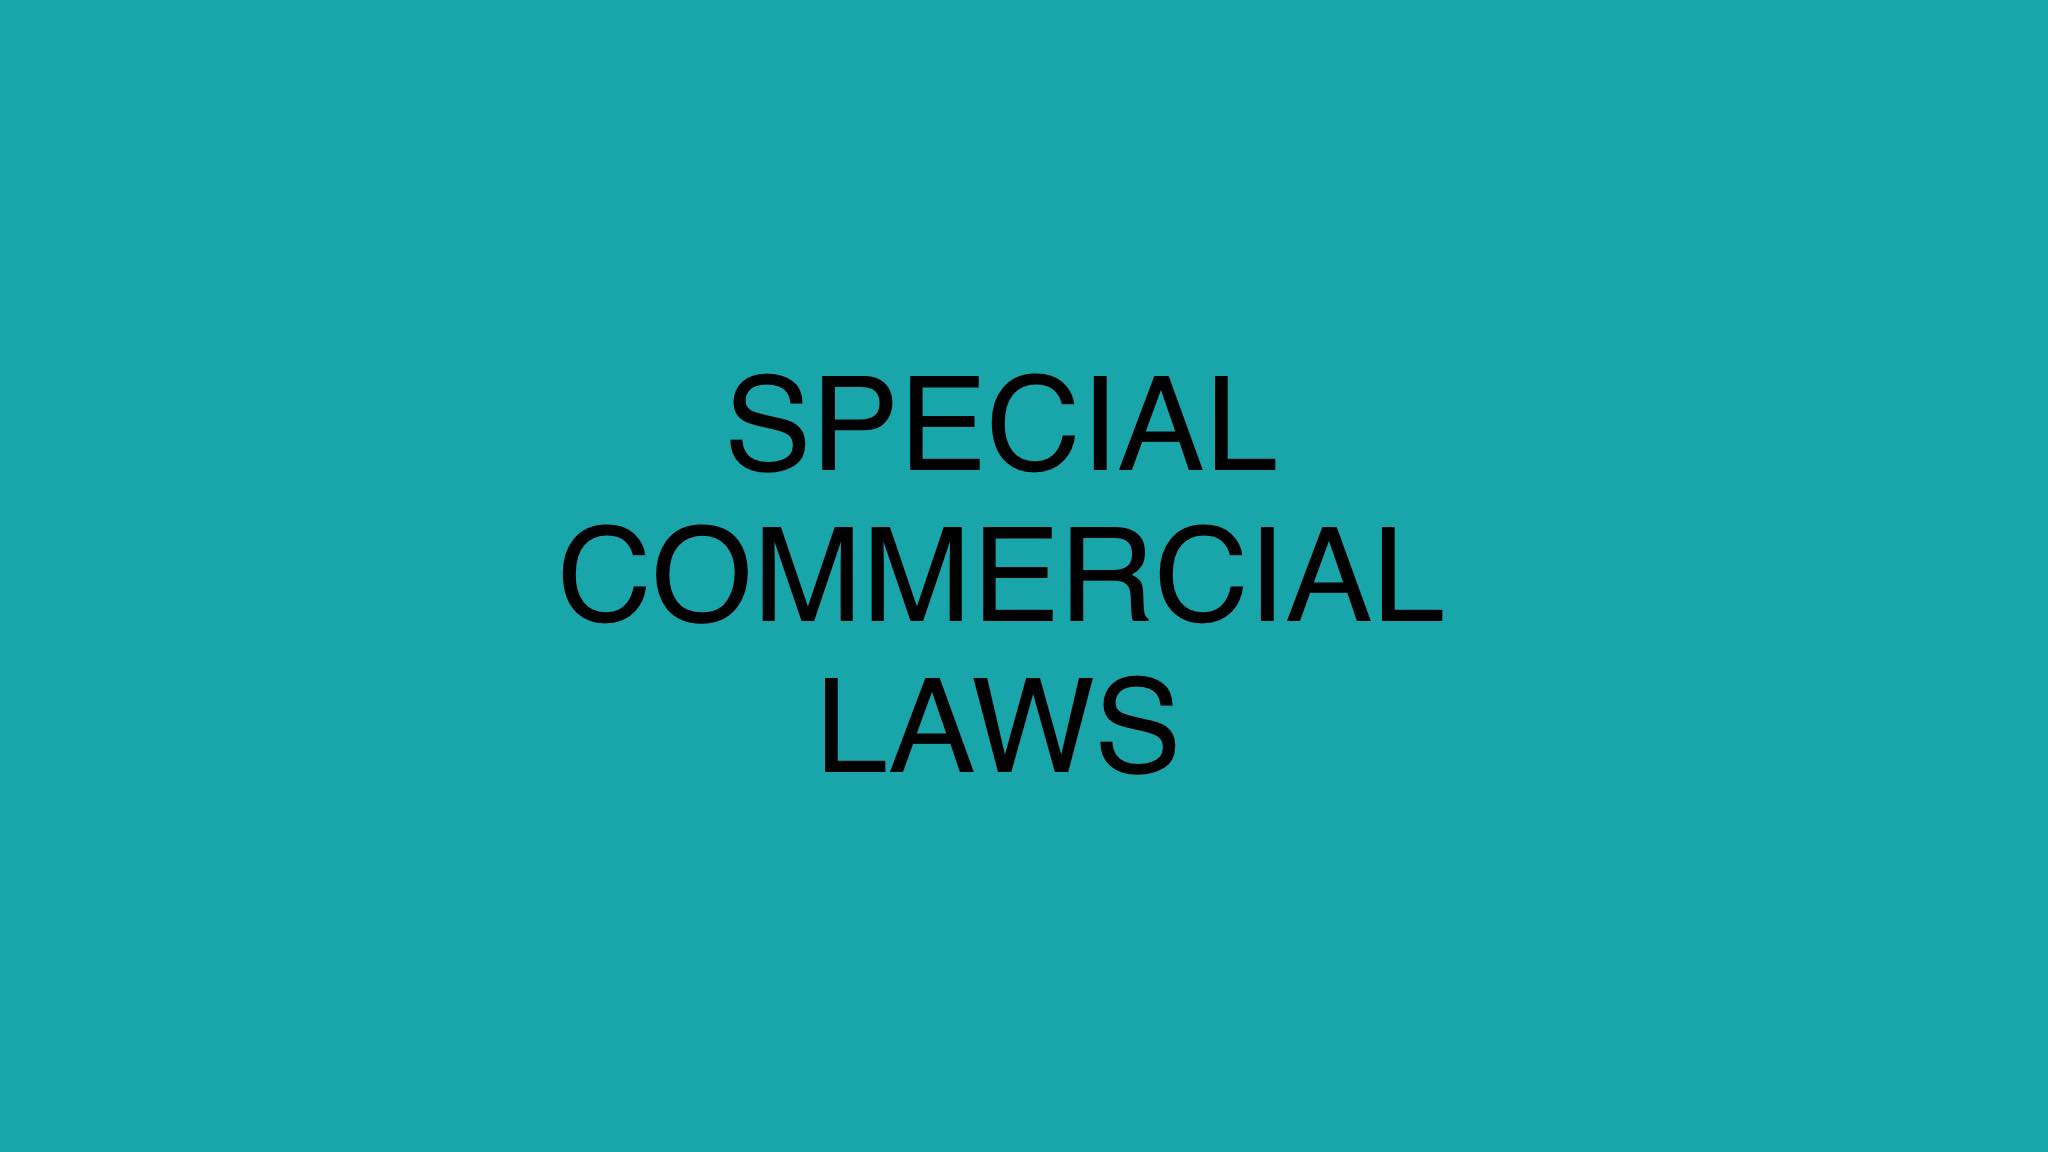 Special Commercial Laws*